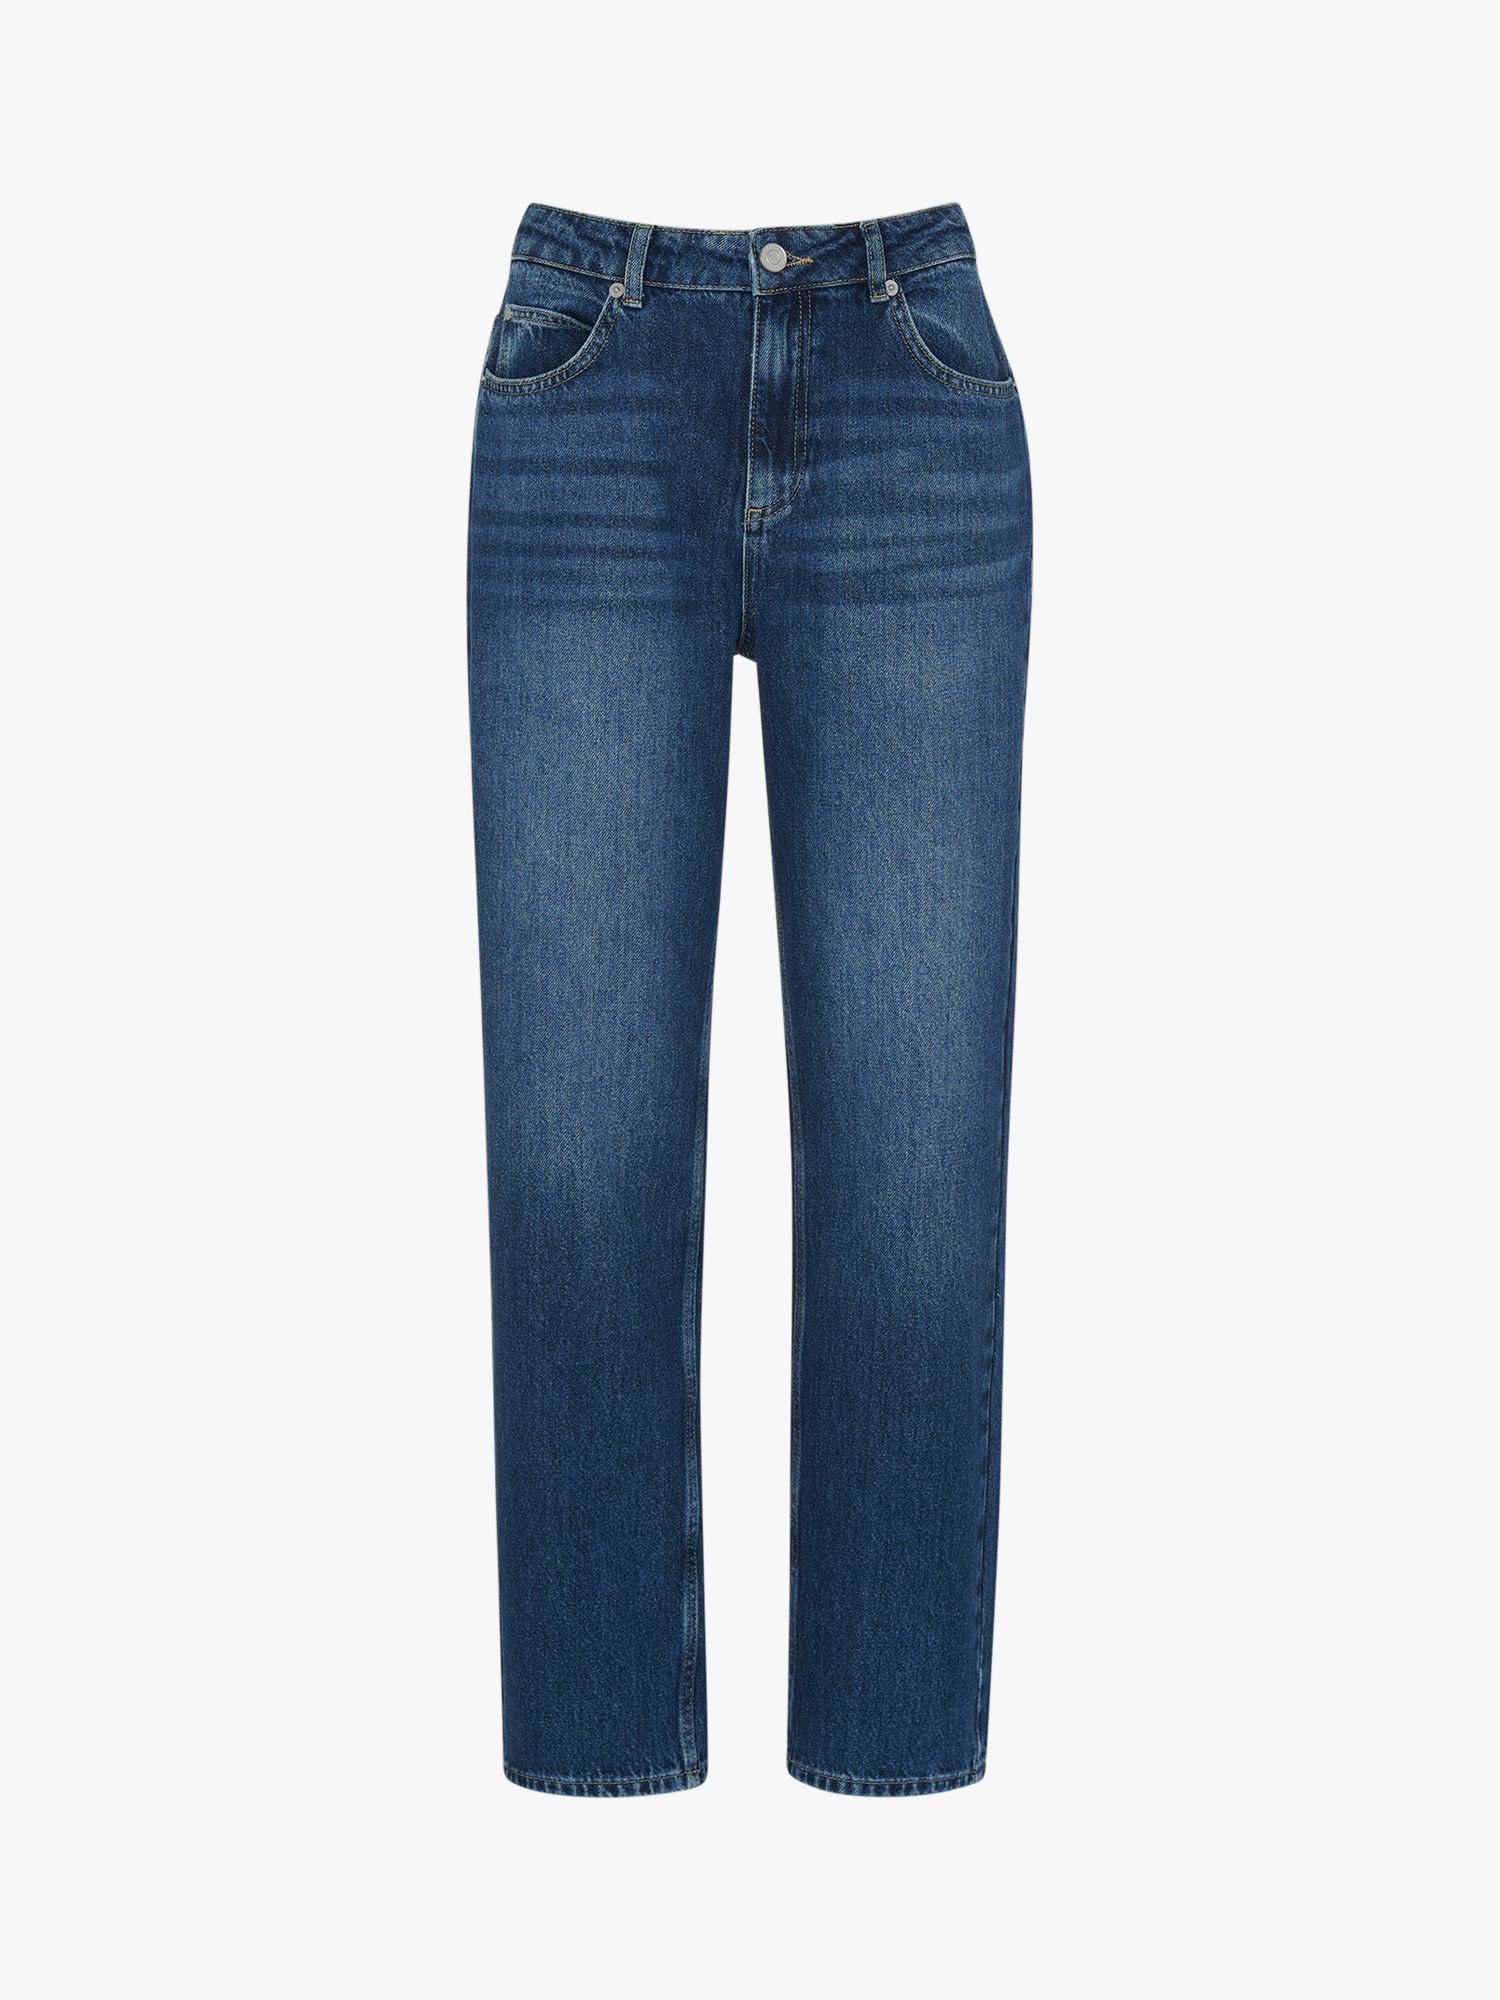 Whistles Authentic Low Waist Jeans, Blue at John Lewis & Partners